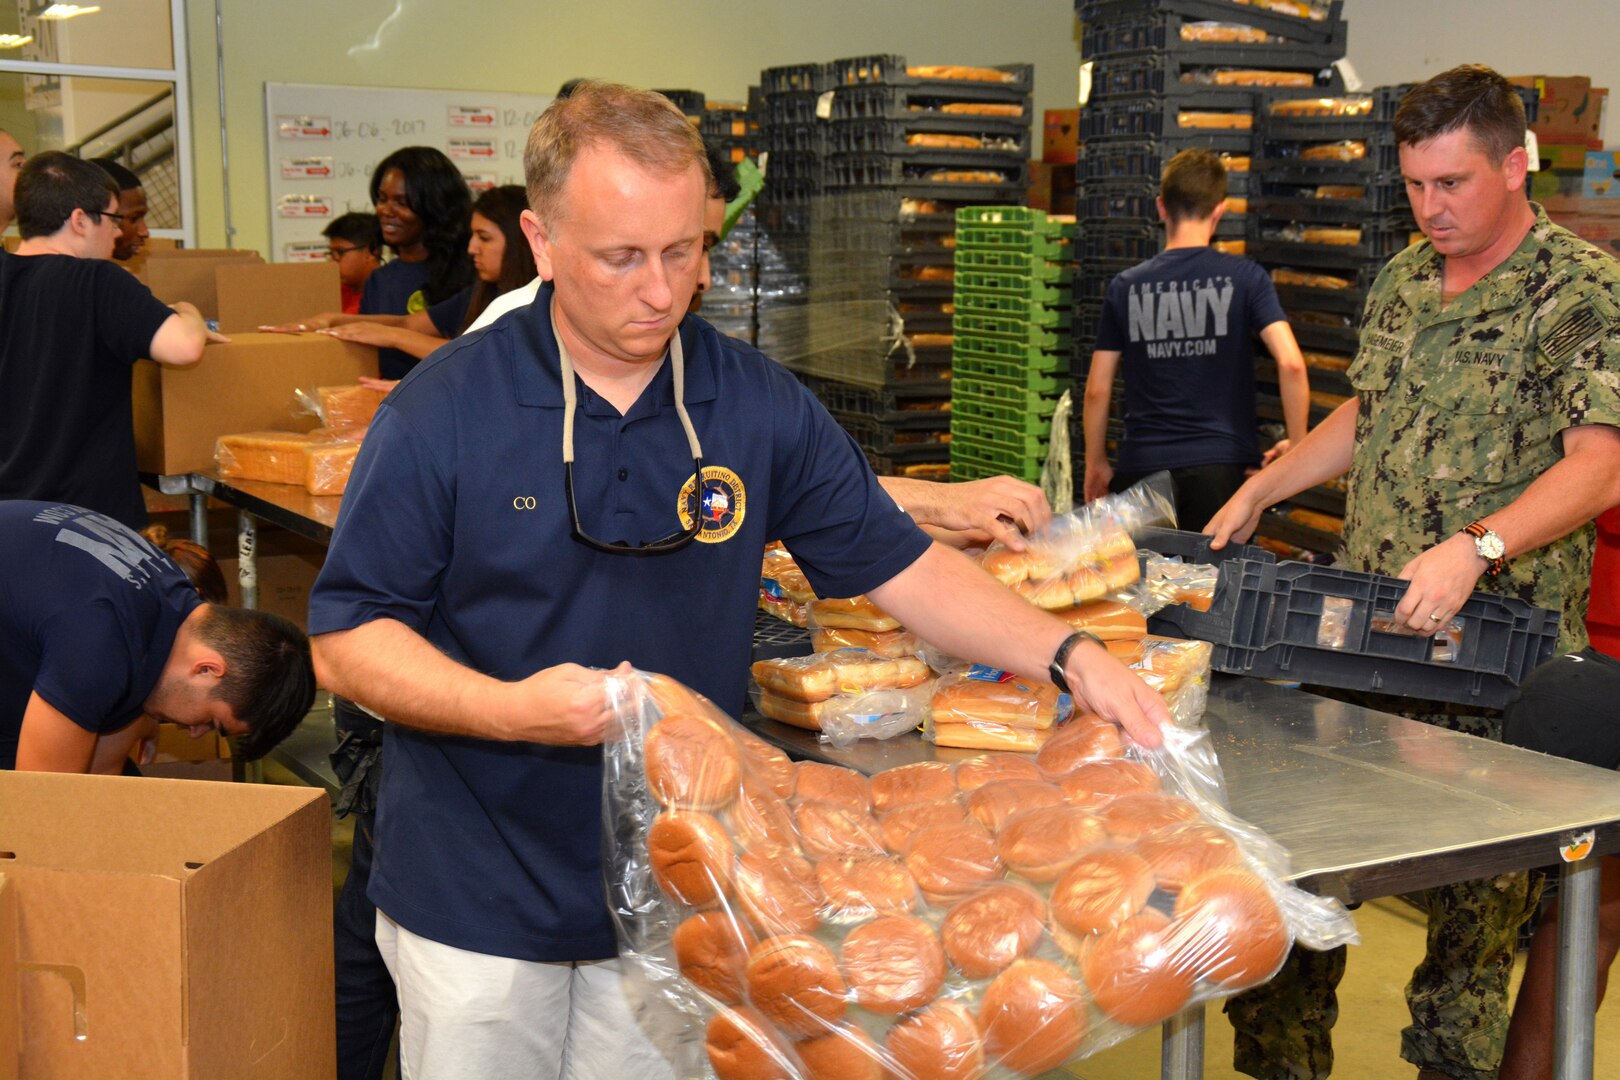 Cmdr. Jeffrey Reynolds, commanding officer of Navy Recruiting District San Antonio, volunteers at the San Antonio Food Bank during a Delayed Entry Program meeting June 6.  During the event, recruiters, along with more than 60 future Sailors and other volunteers, filled 575 bags of produce and sorted 19,447 pounds of food which will provide 15,558 meals for needy families.  The purpose of the volunteerism was to instill the “Whole Sailor Concept.”